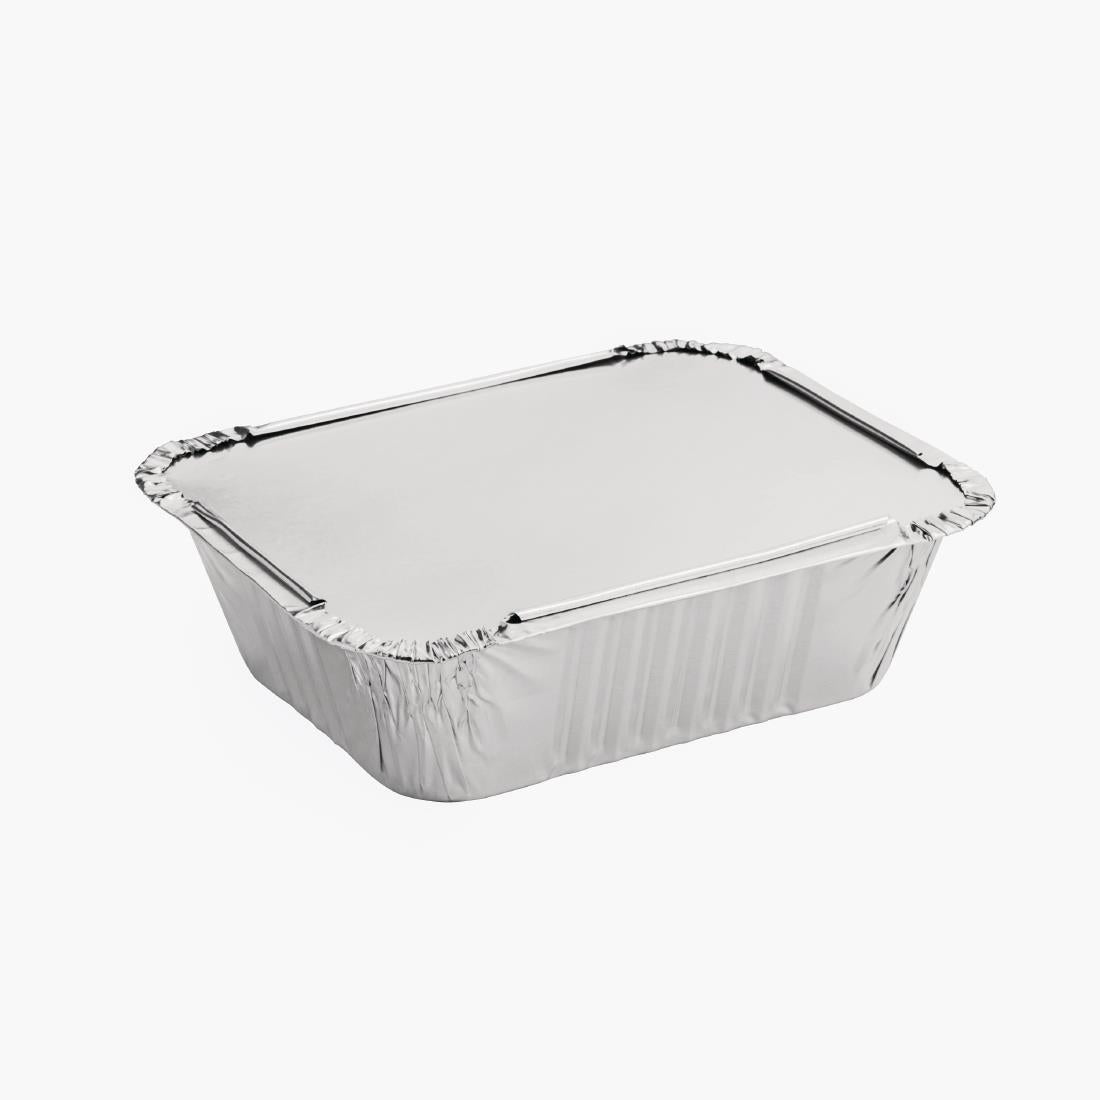 Fiesta Waxed Lids for Medium Foil Containers (Pack of 500) JD Catering Equipment Solutions Ltd